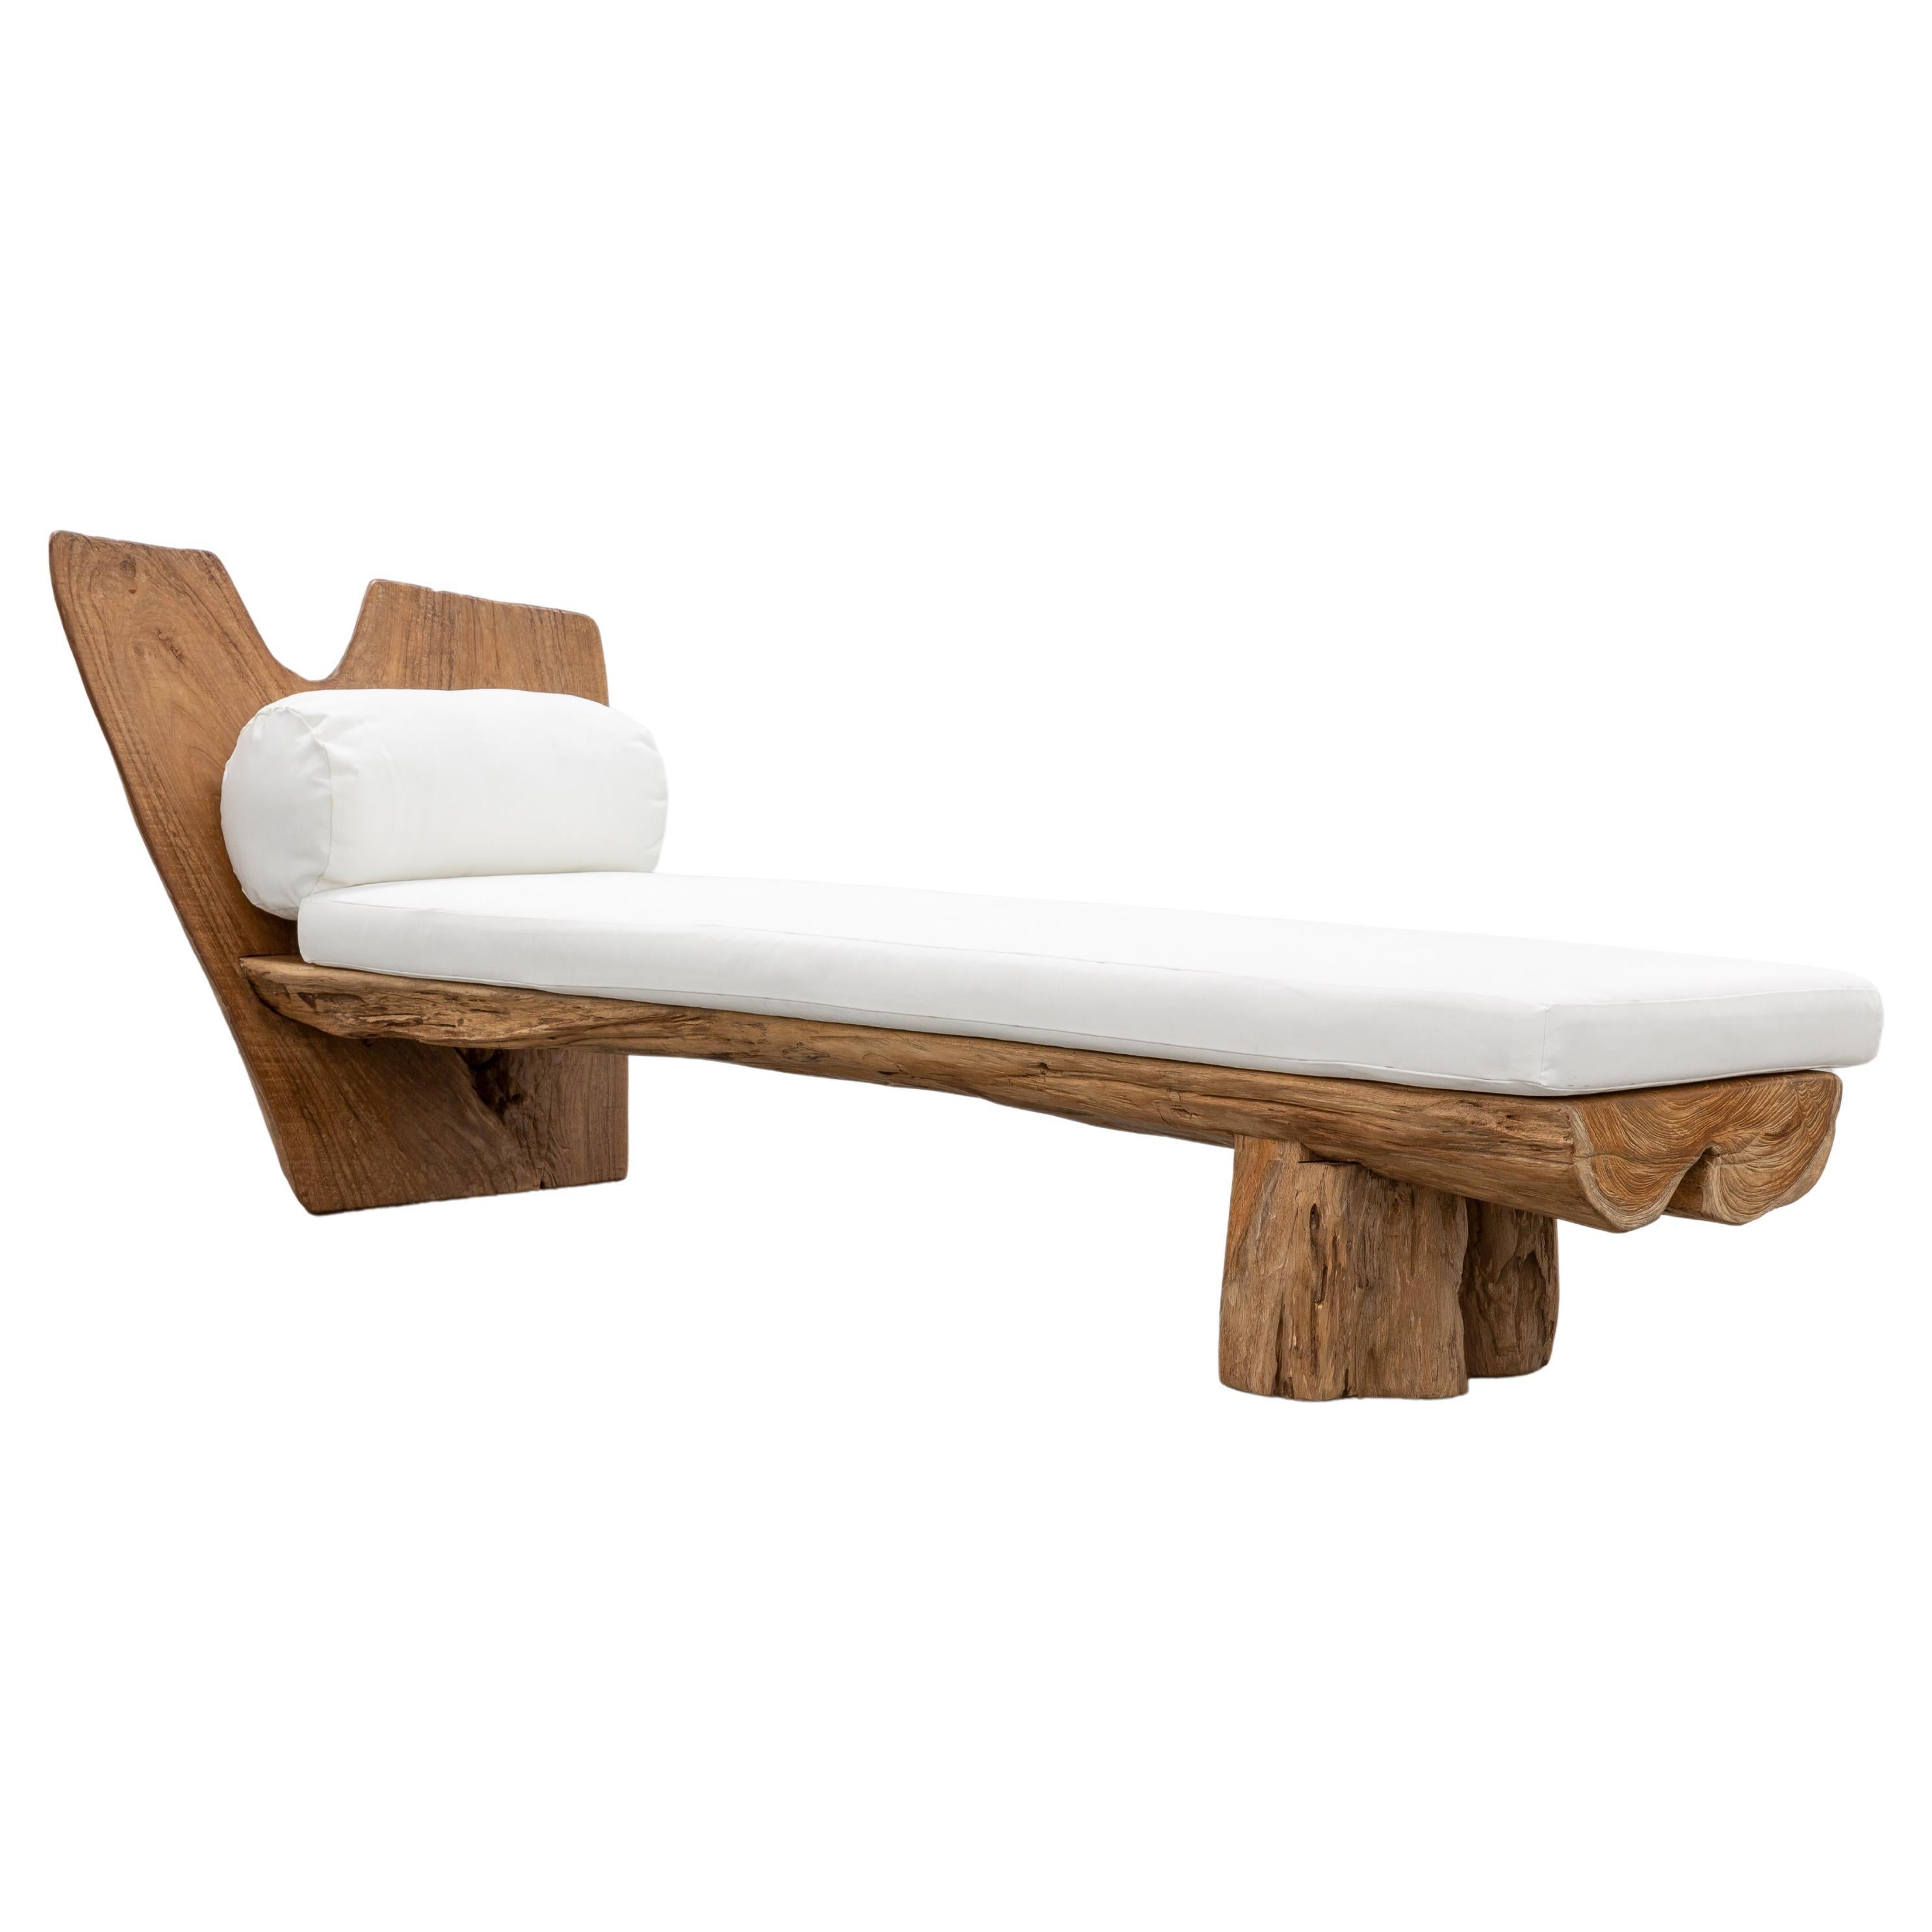 Lakkar Wood Chaise by CEU Studio, Represented by Tuleste Factory For Sale